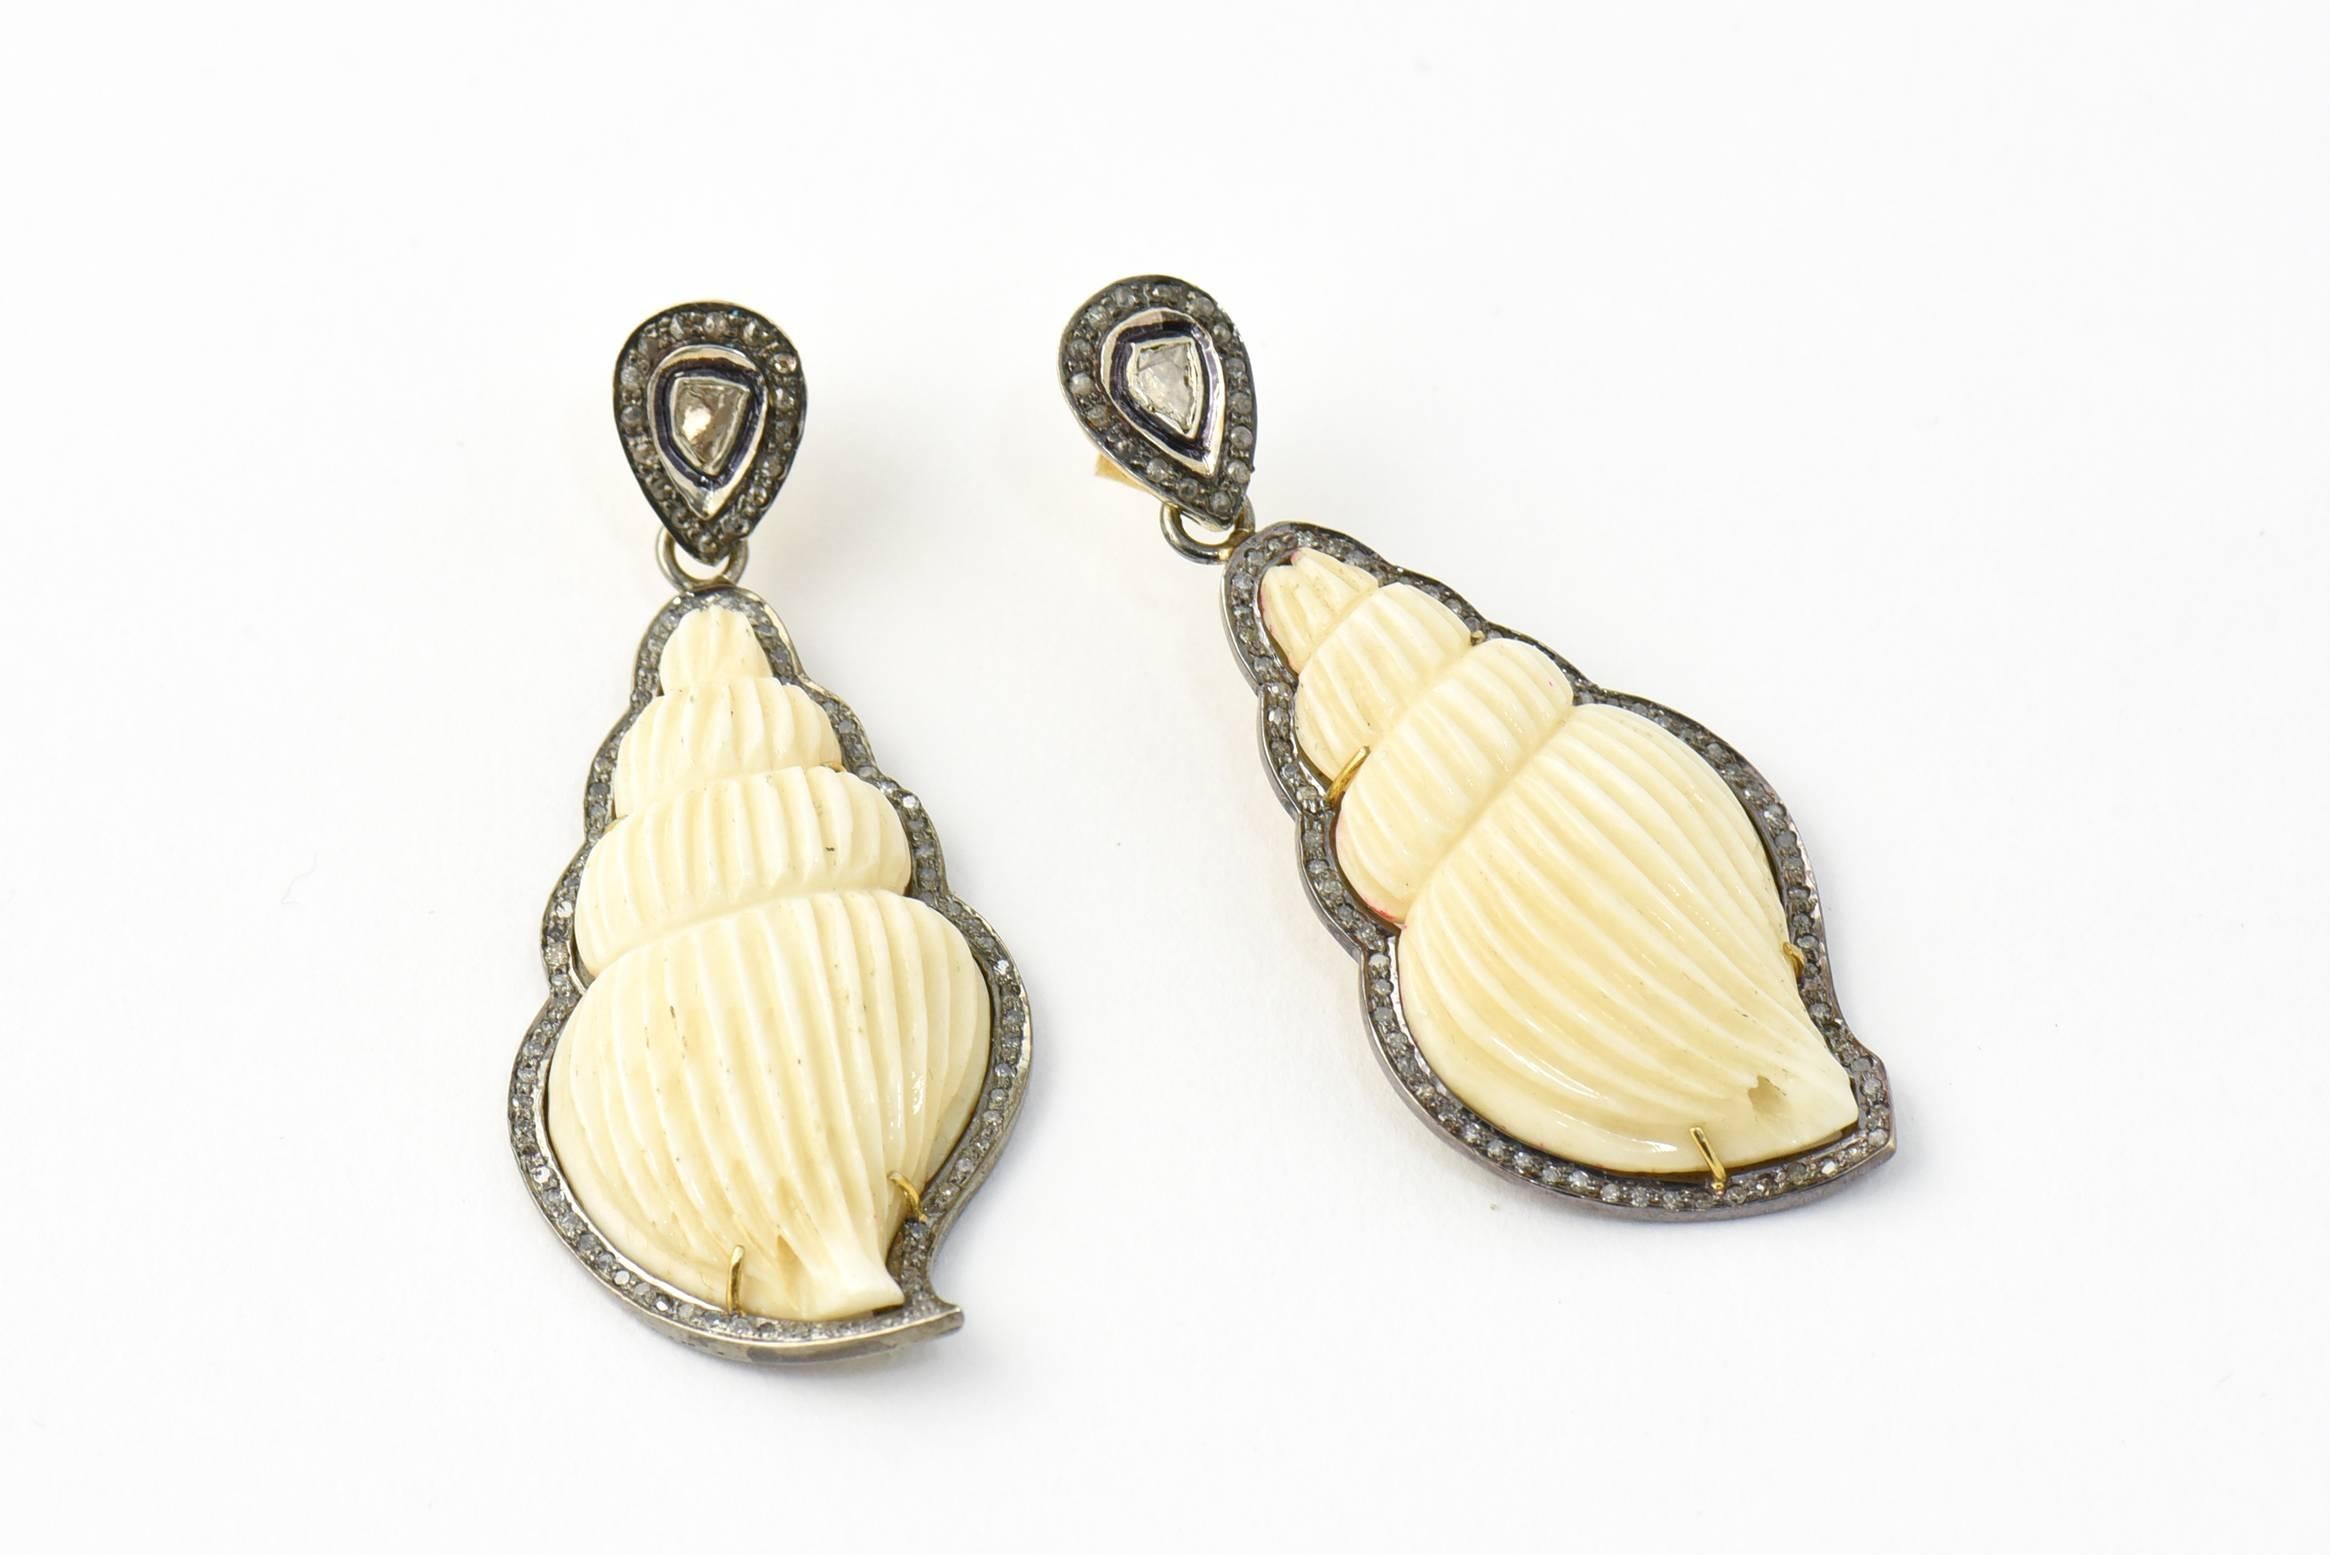 Wonderfully carved bone in the shape of shells mounted in a custom made diamond and sterling frame that imitates the shell edges.  The shells dangle off a rose diamond and Sterling teardrop with a 14k gold back.